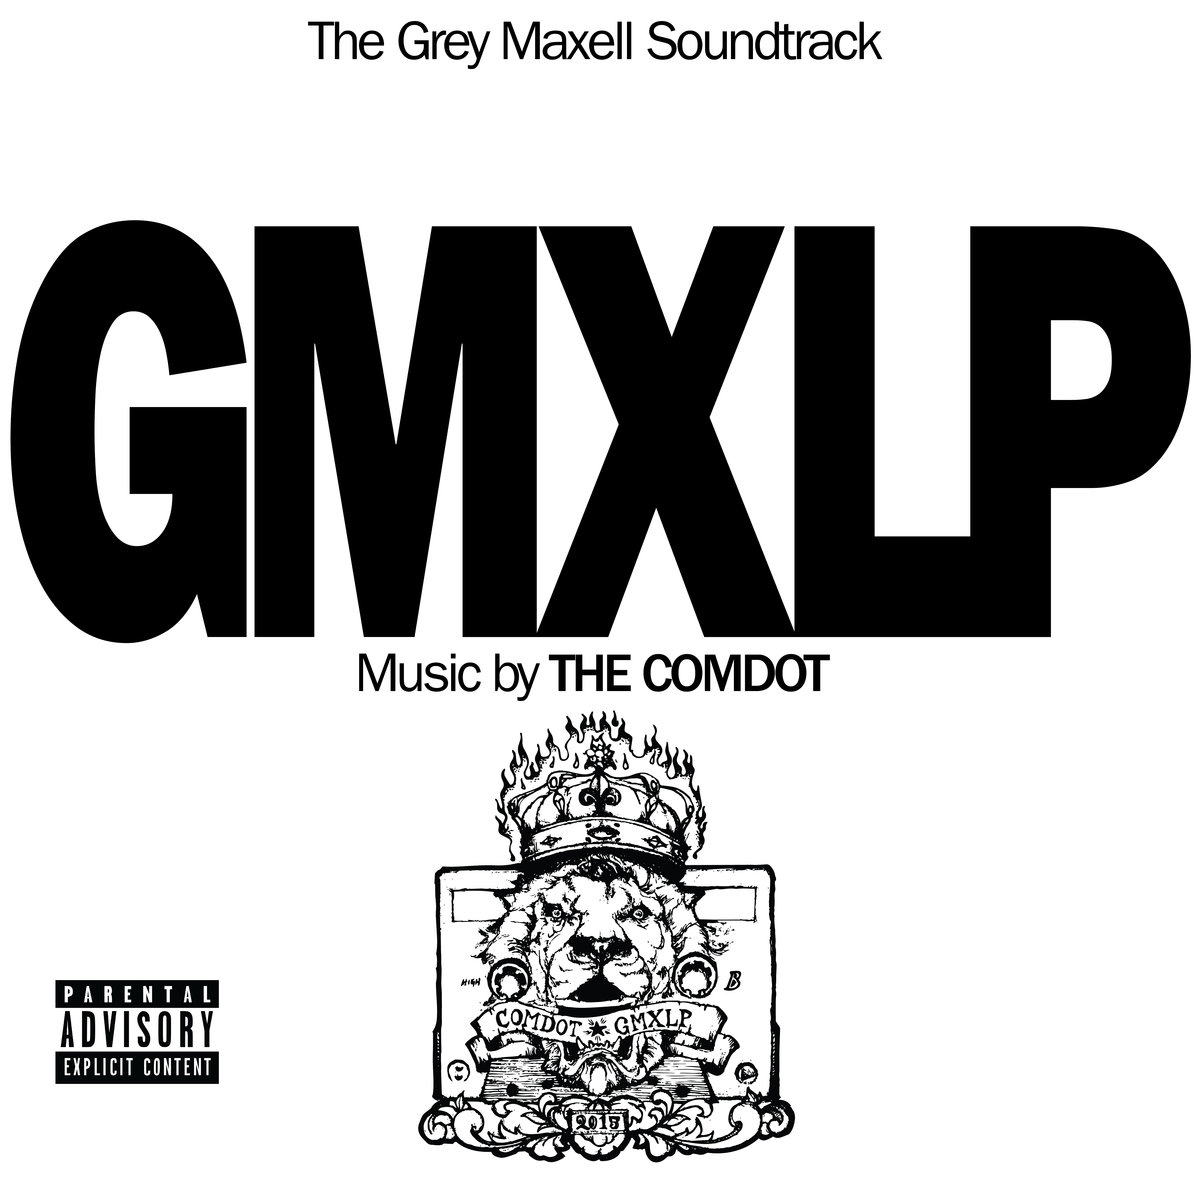 The Comdot - "The Grey Maxell Soundtrack" (Release)